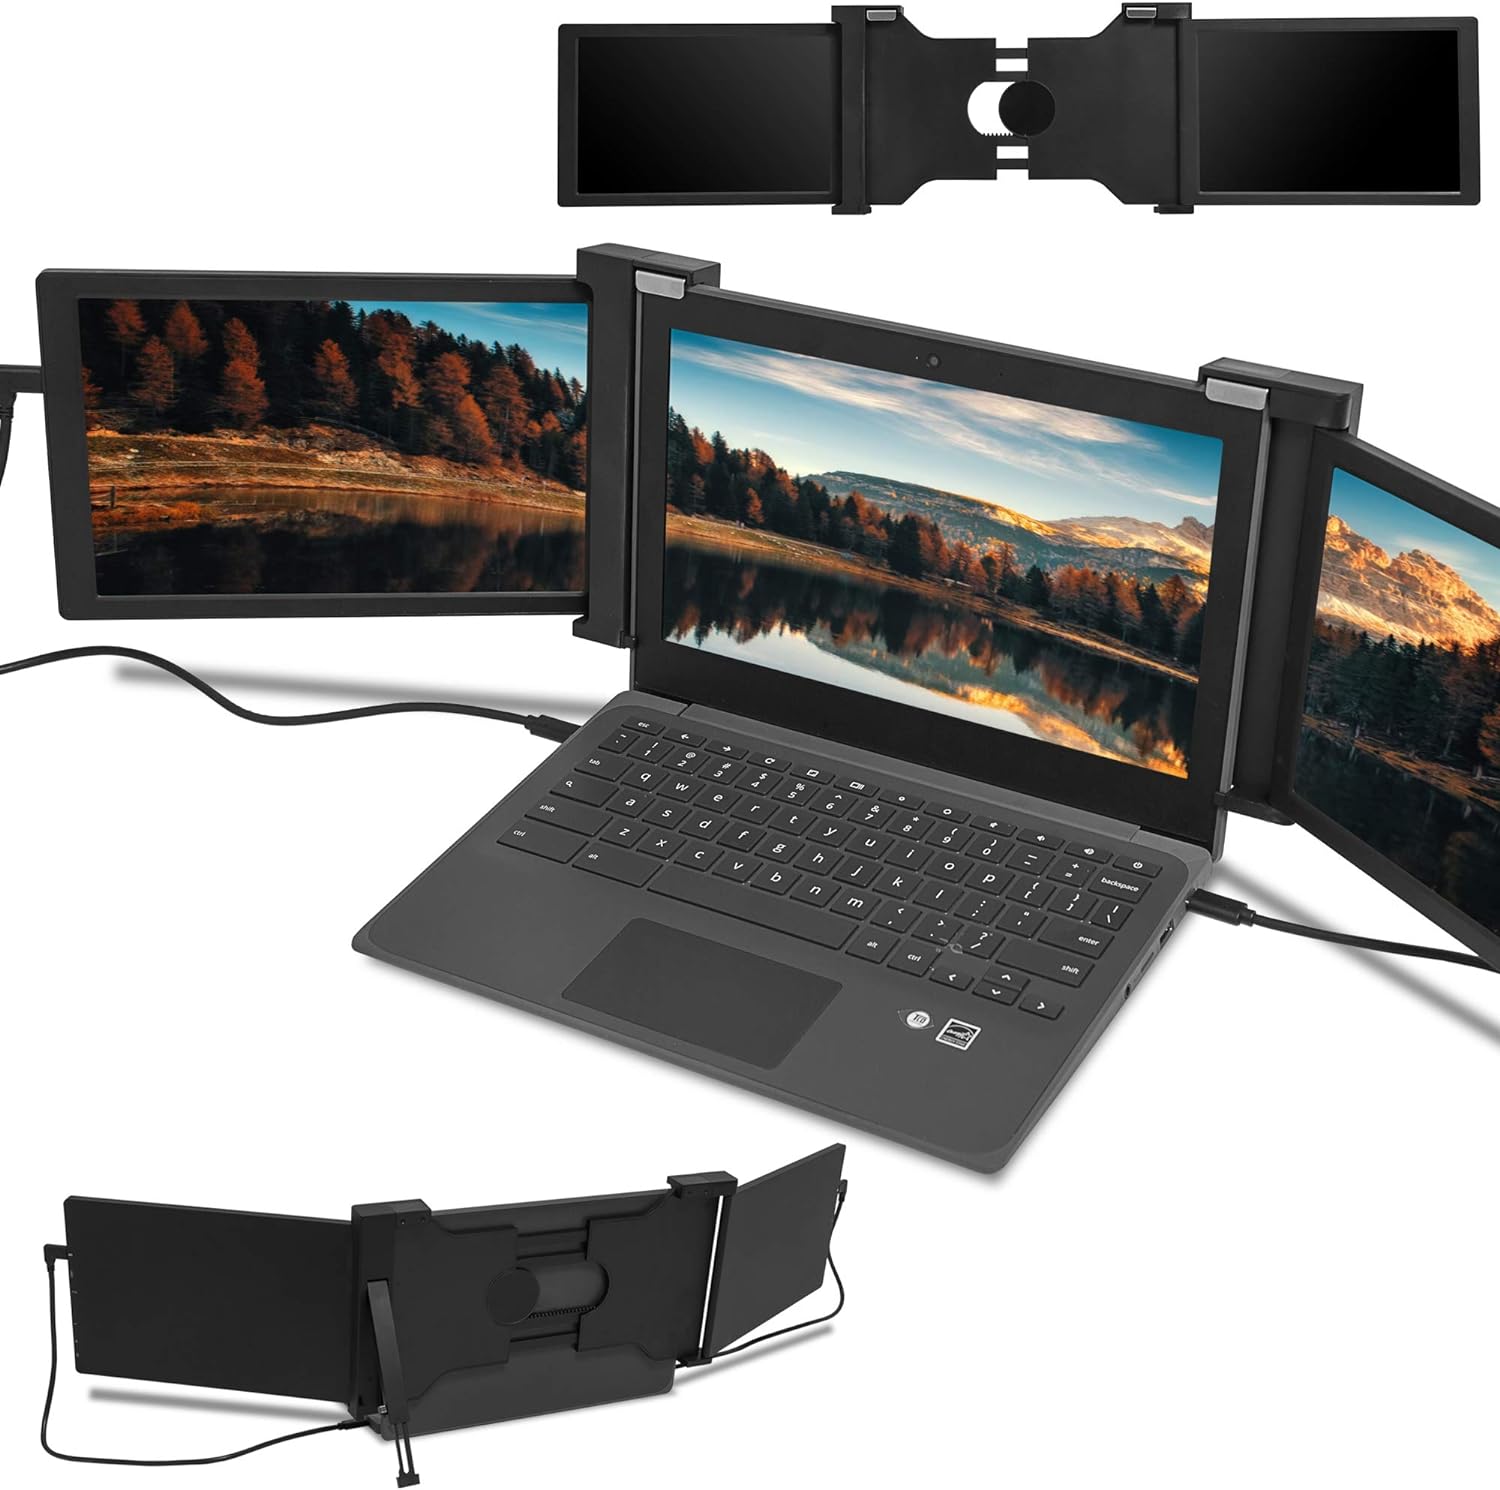 Laptop with multiple connected external devices